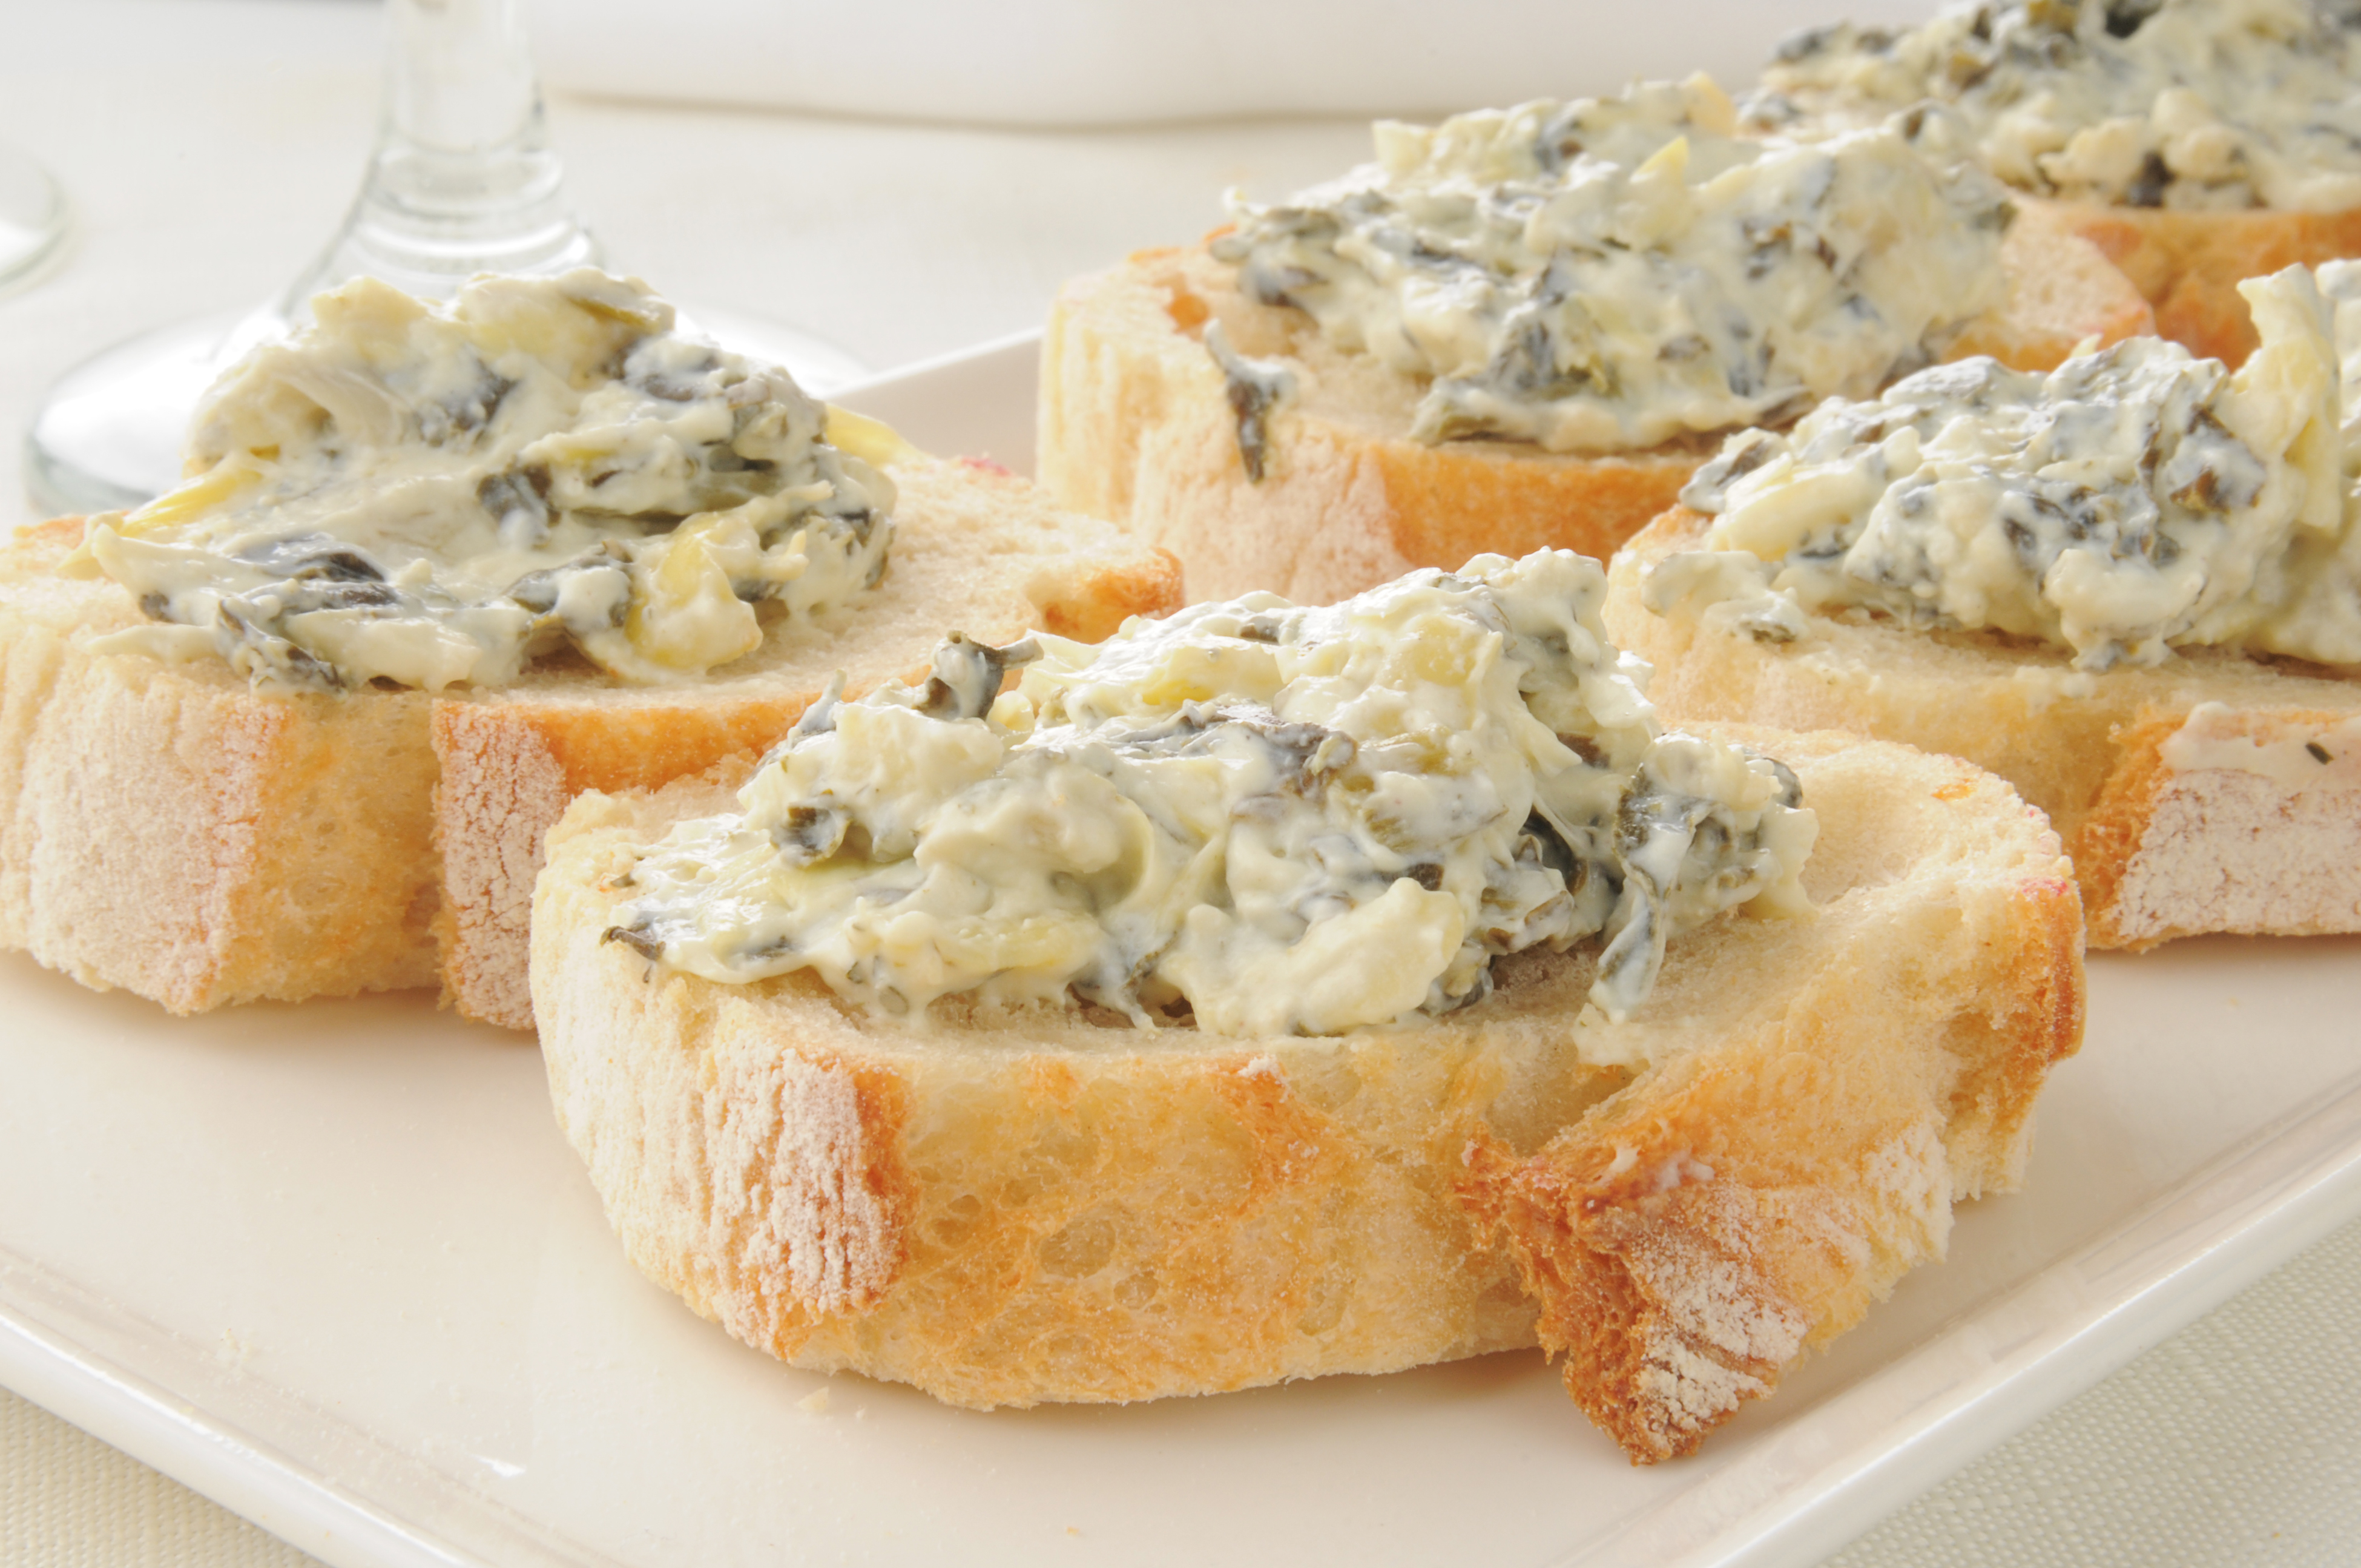 Weight Watchers Artichoke Dip on top of small pieces of bread.